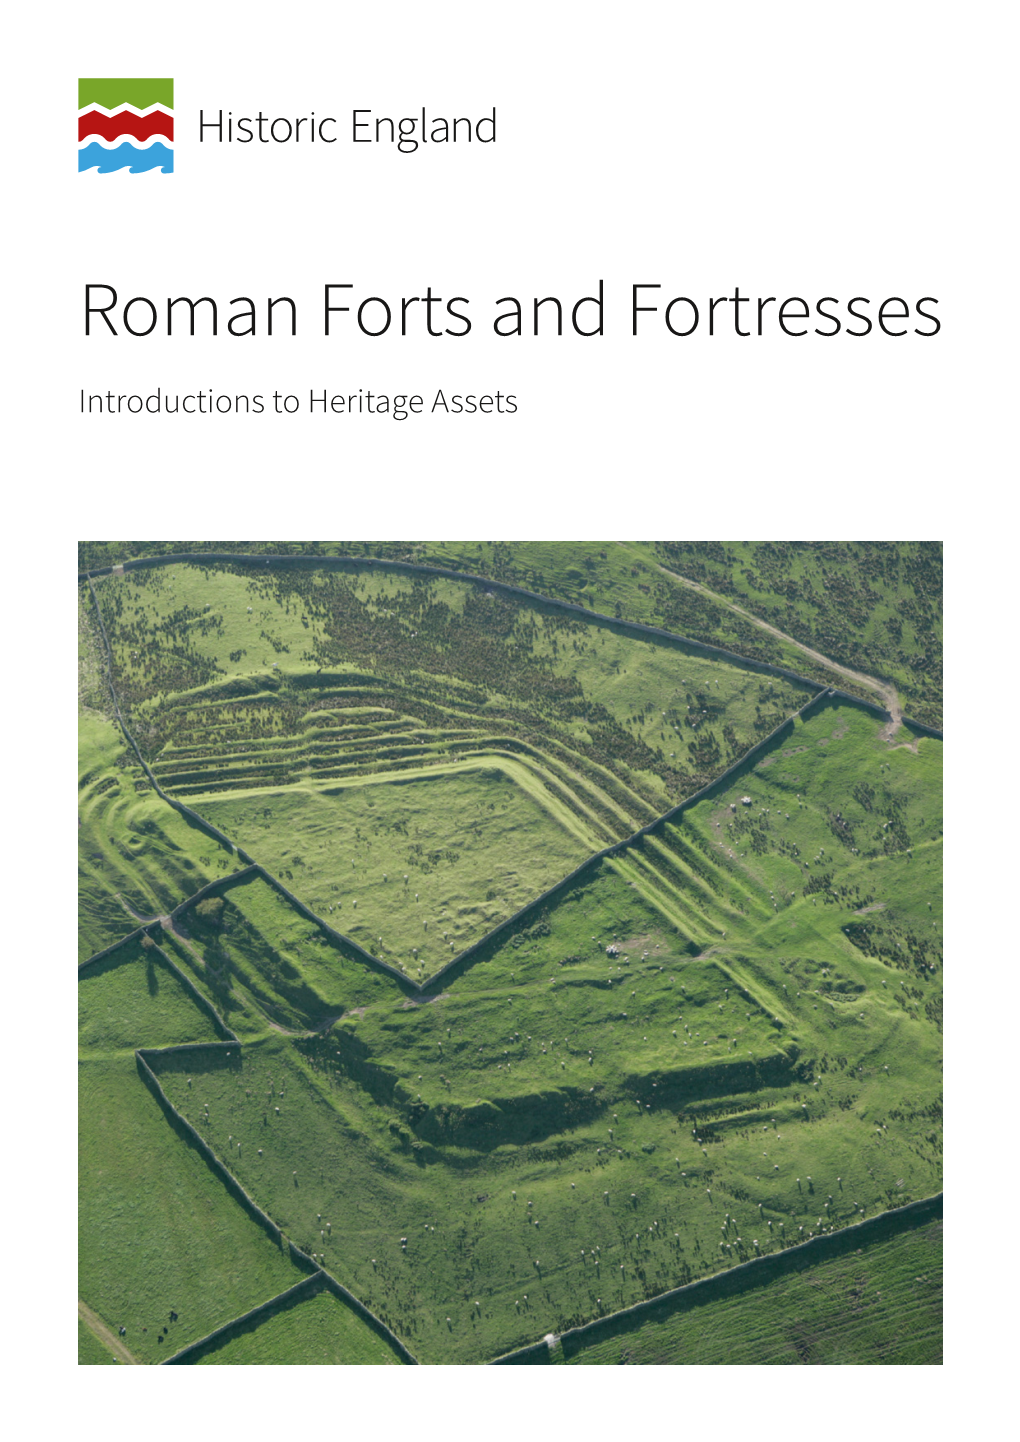 Roman Forts and Fortresses Introductions to Heritage Assets Summary